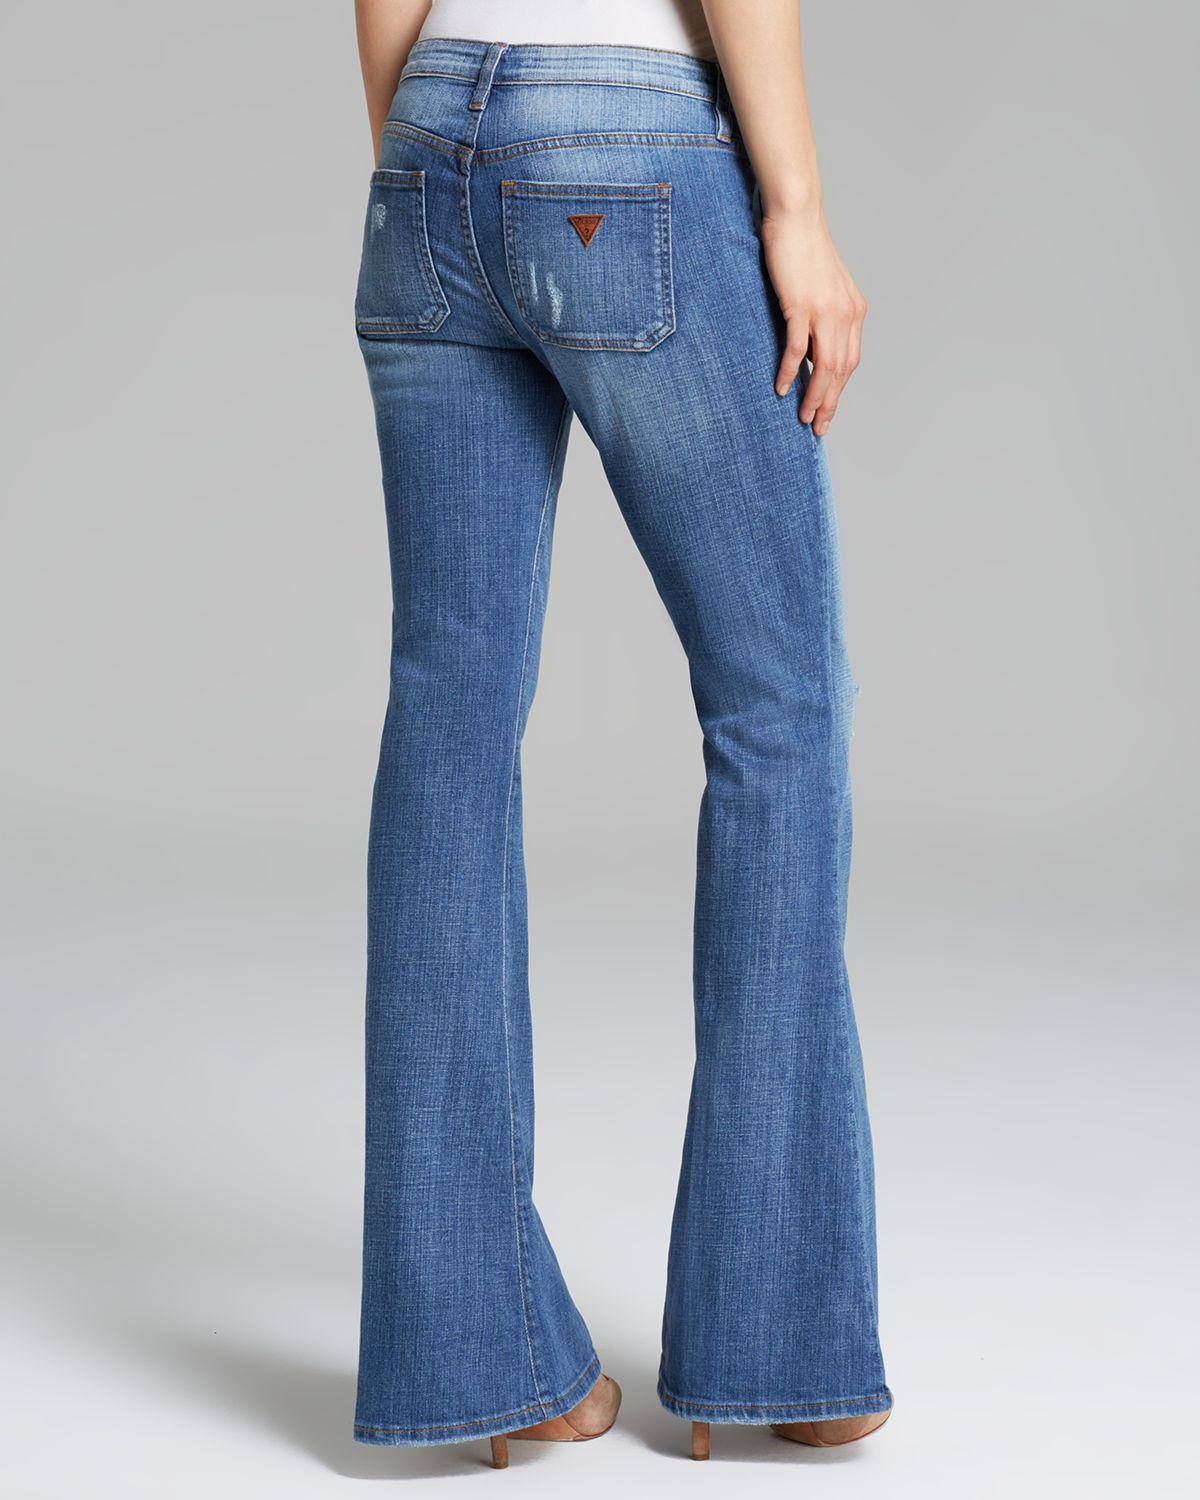 Guess Jeans 70s Flare in Rossen Wash in Blue - Lyst